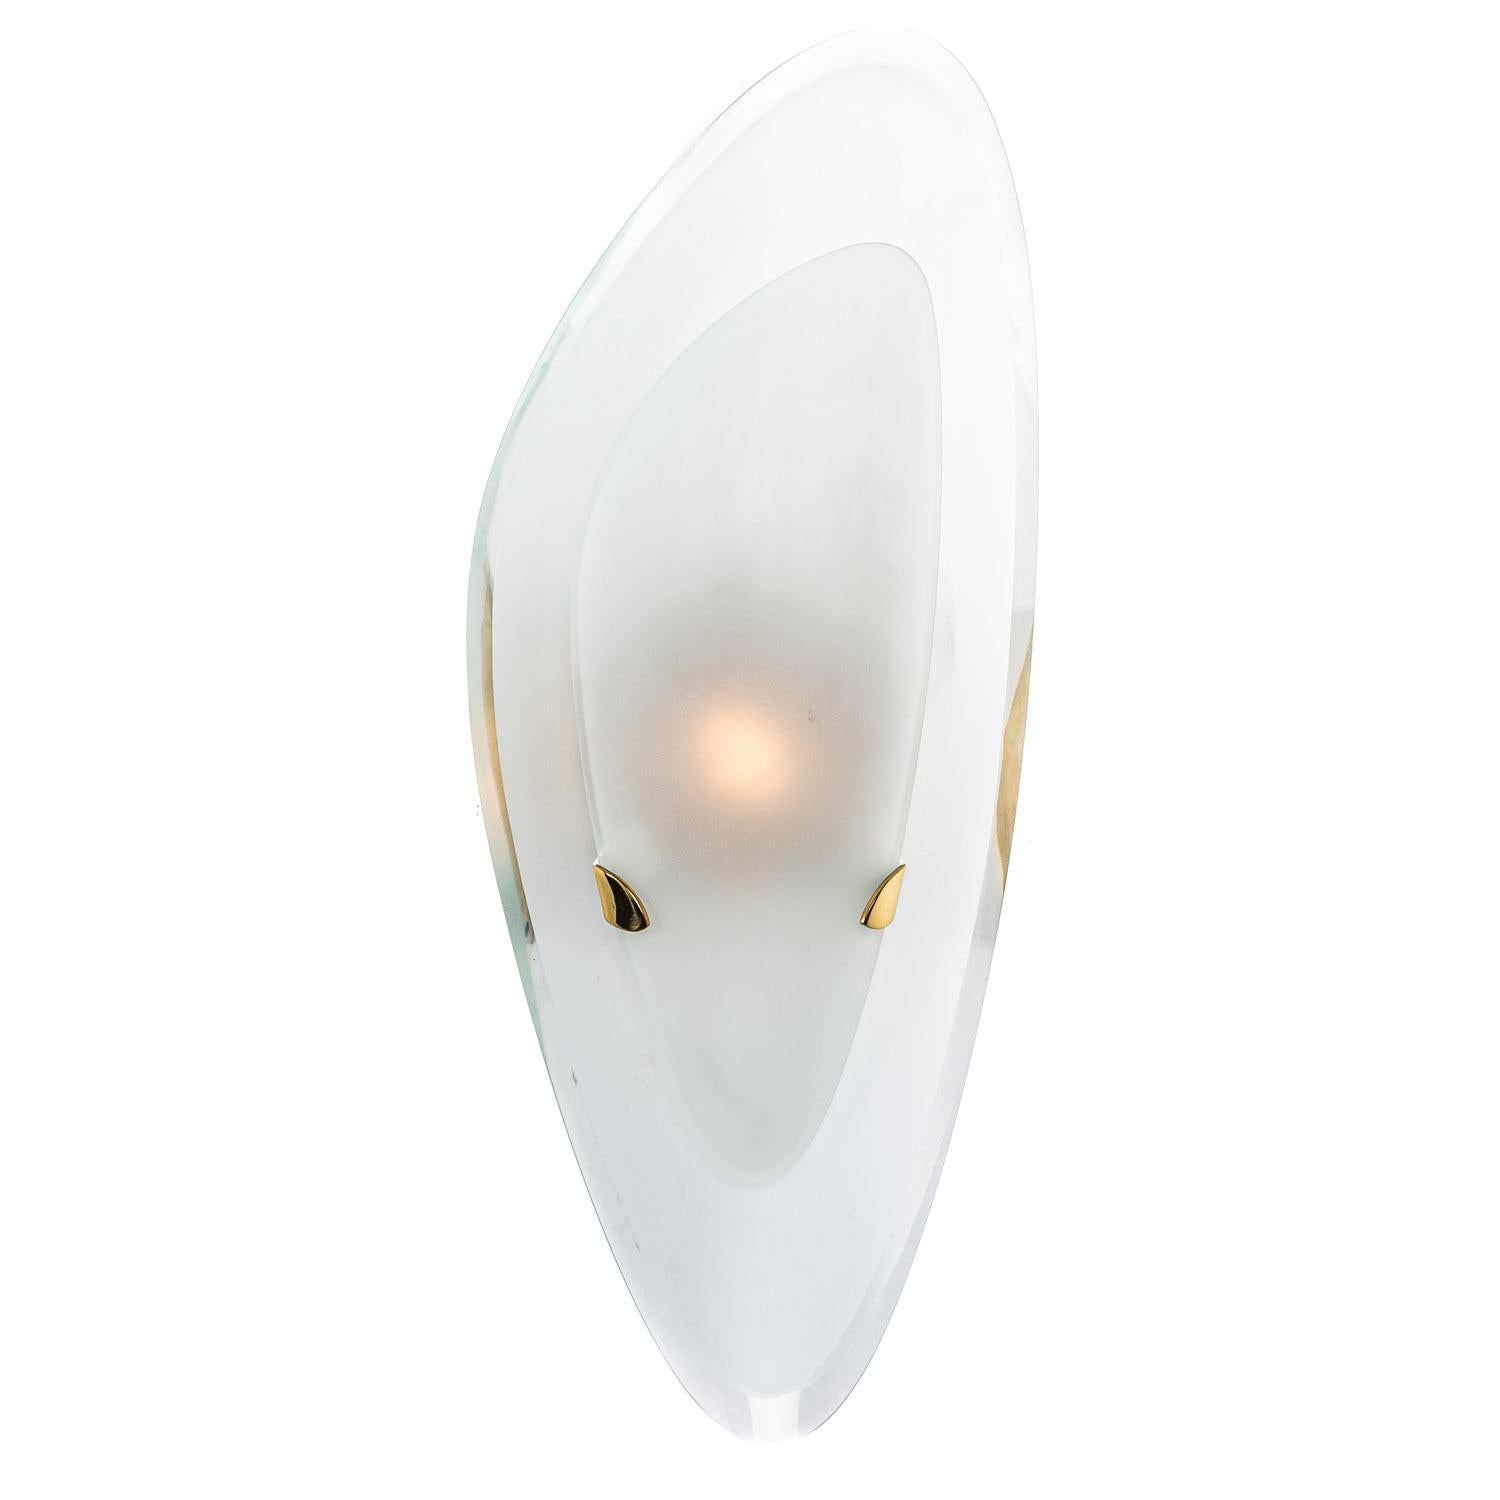 This is an elegant set of wall lights from the designer Max Ingrand consists of two beveled frosty glass glass plates, one larger than the other.